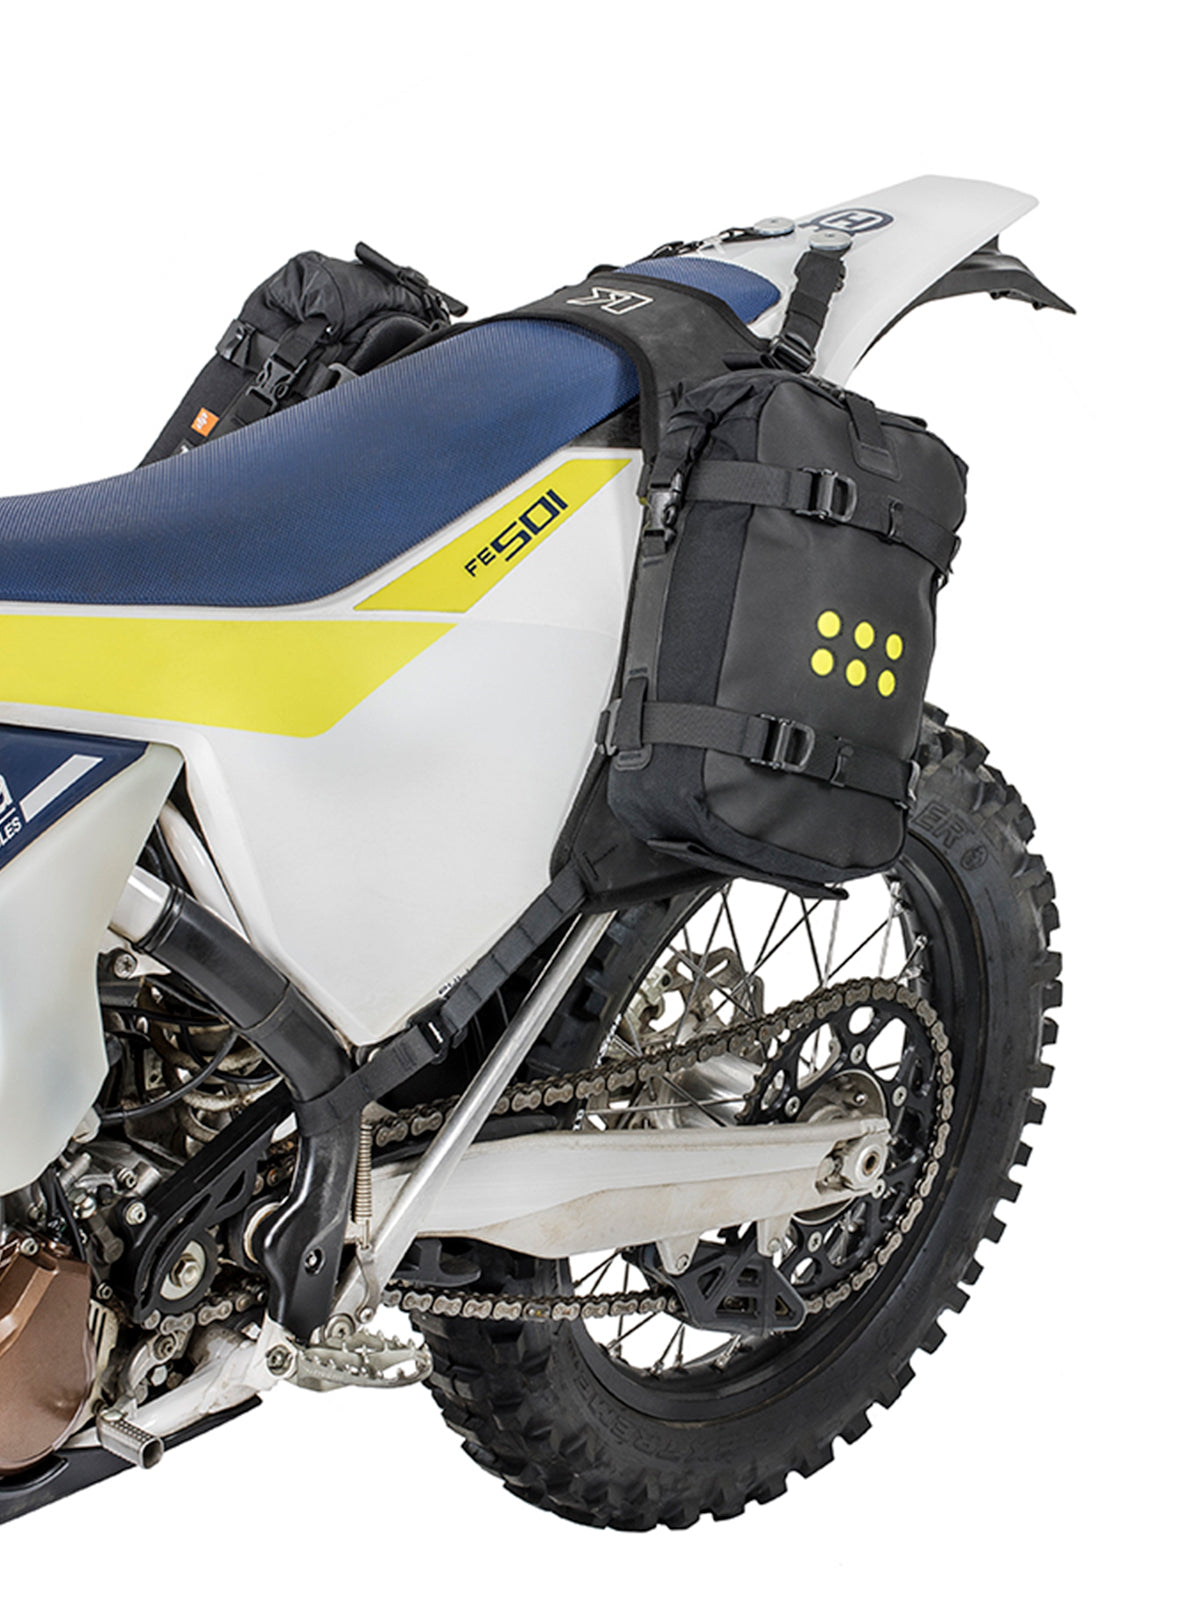 Kriega OS-Combo 12 fitted to Husqvarna motorcycle